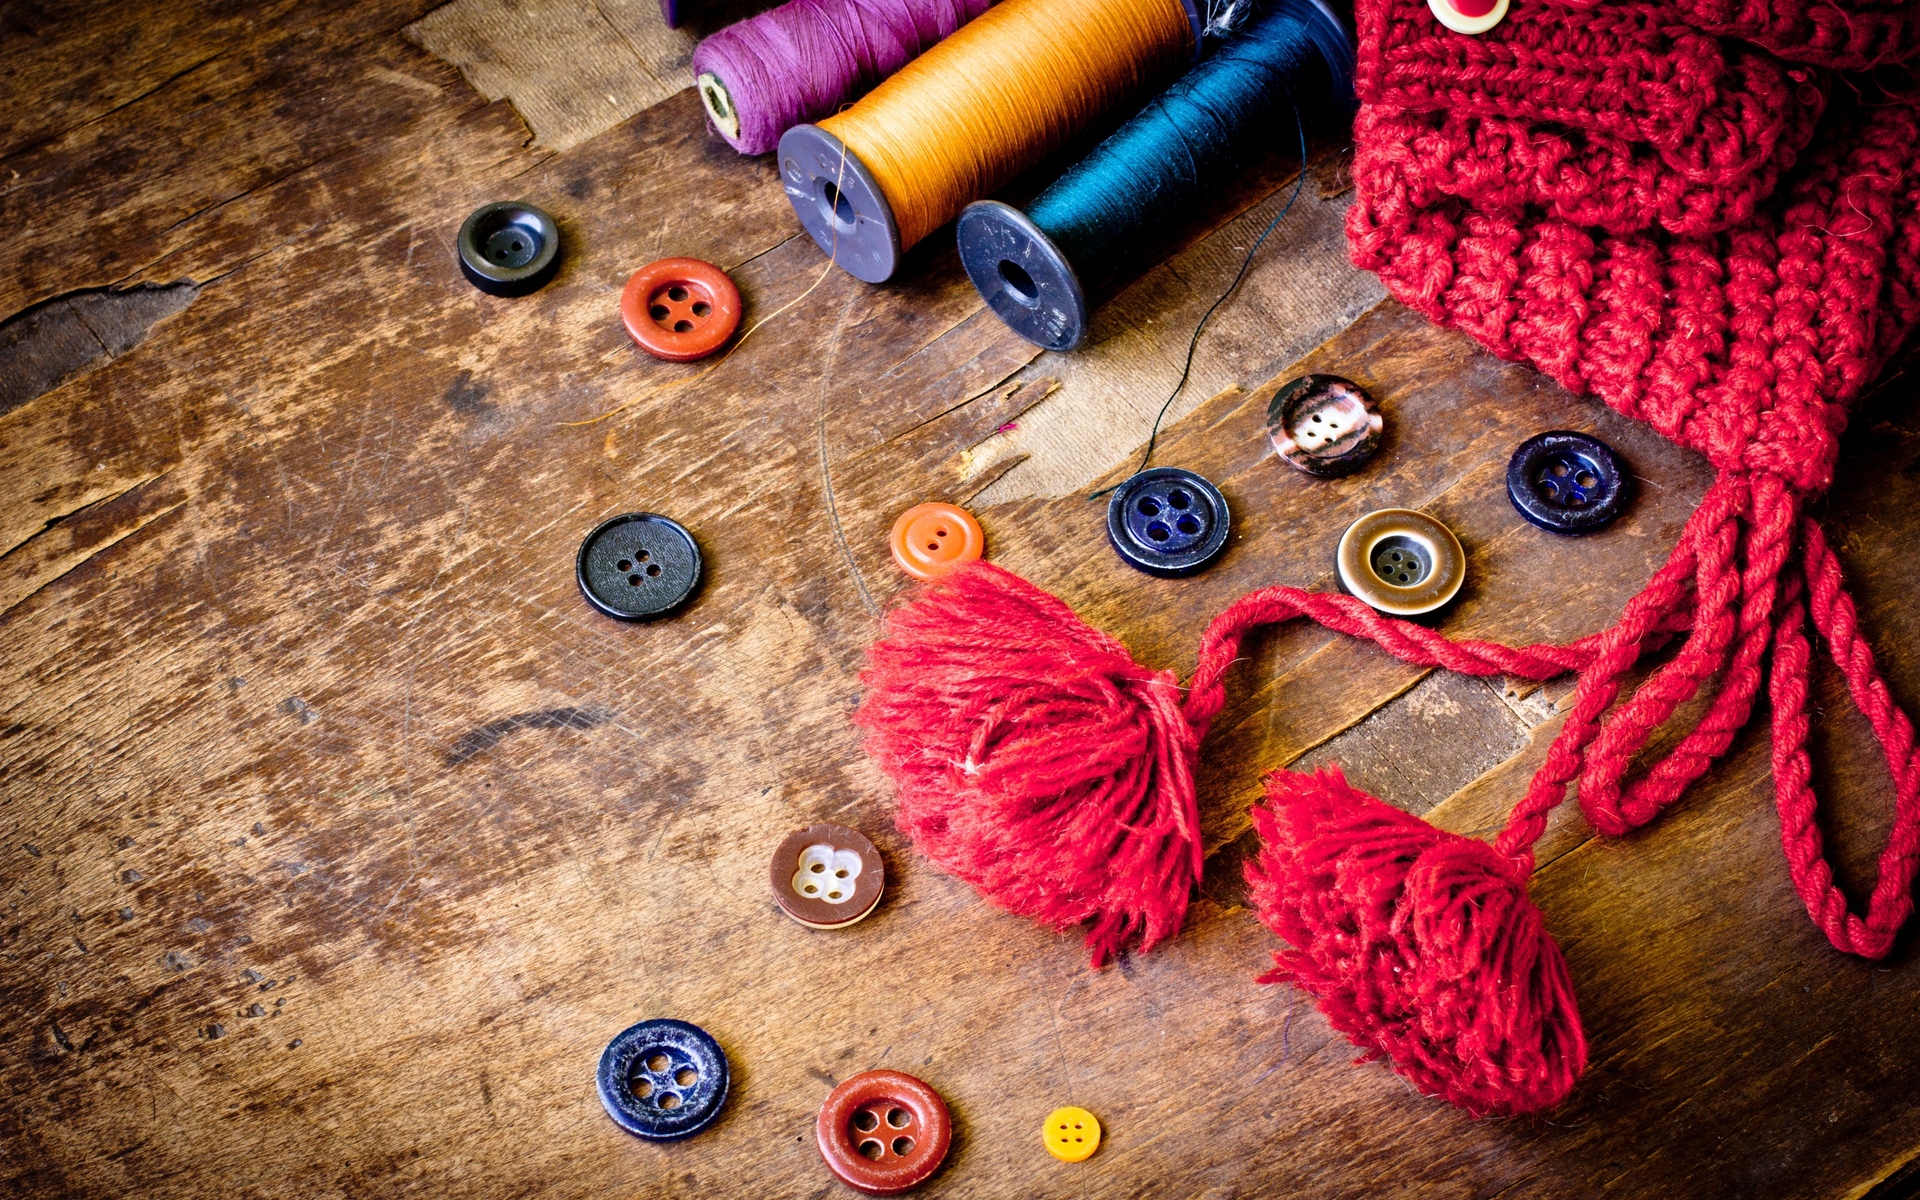 photography, Artistic, Color, Buttons, Objects, Abstract, Yarn, Linen, Thread, Spool, Circles, Sewing, Sew, Yarn, Hobby Wallpaper